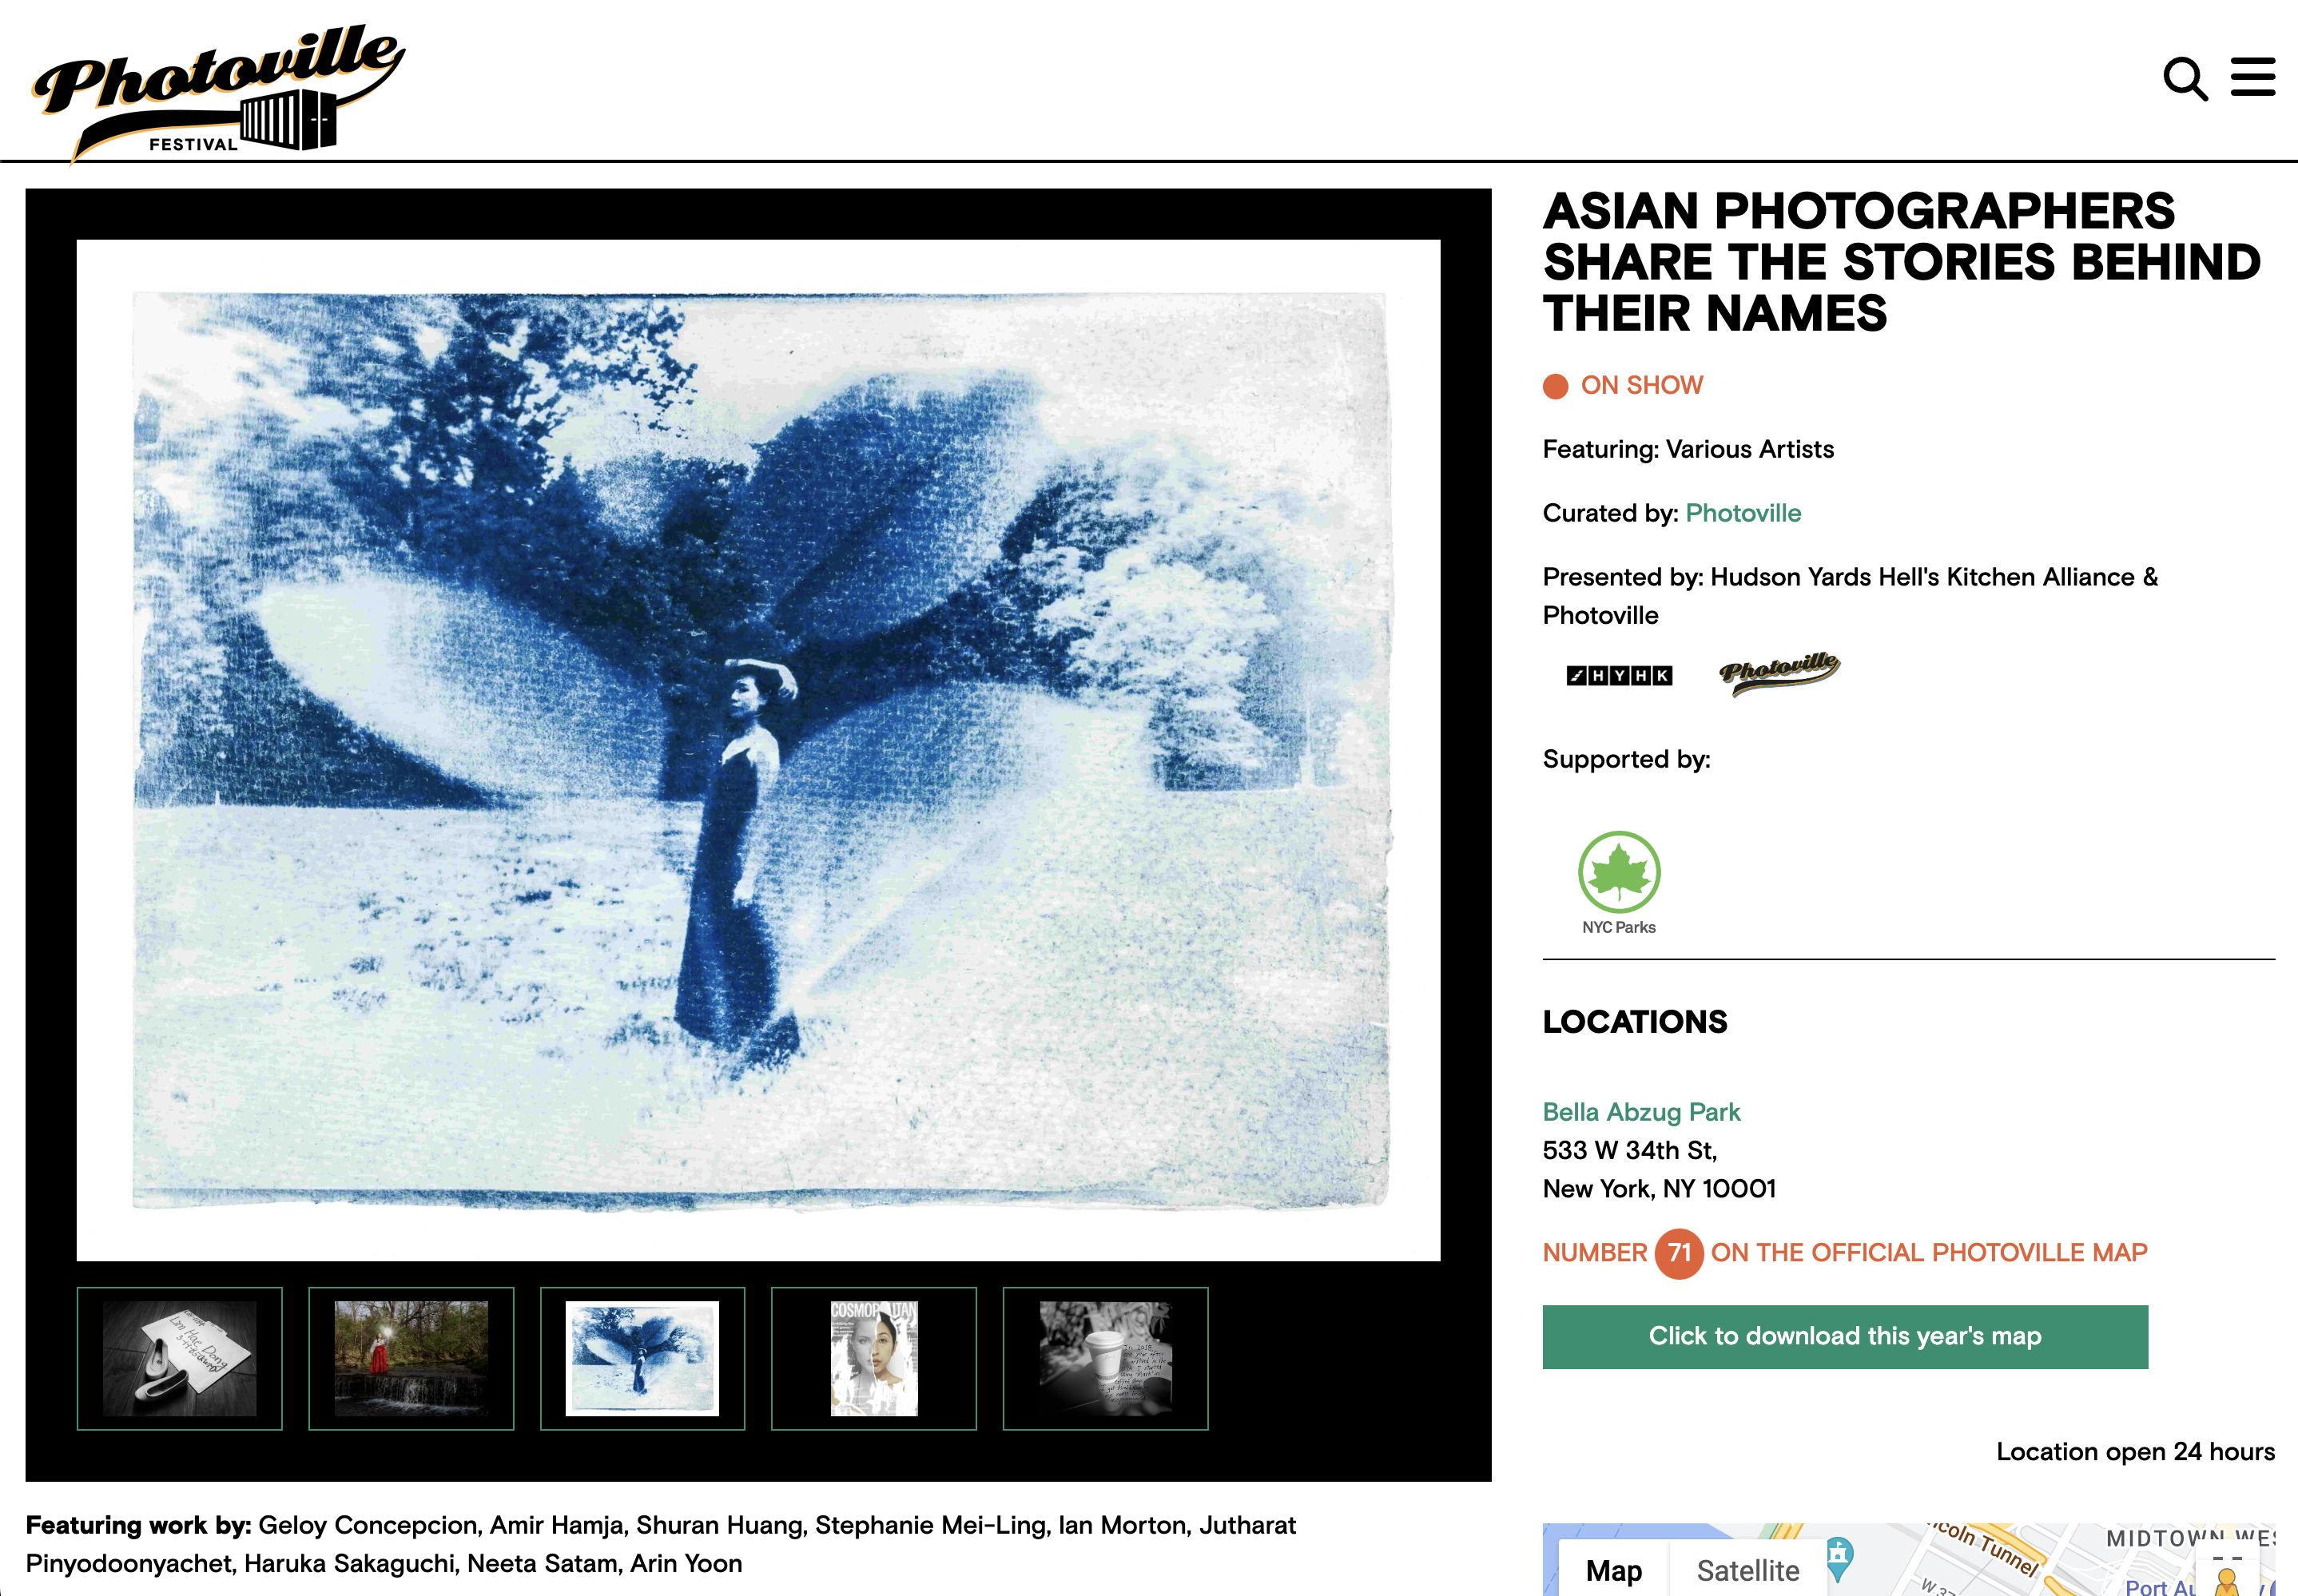 On 2023 Photoville Exhibition: Asian Photographers Share The Stories Behind Their Names